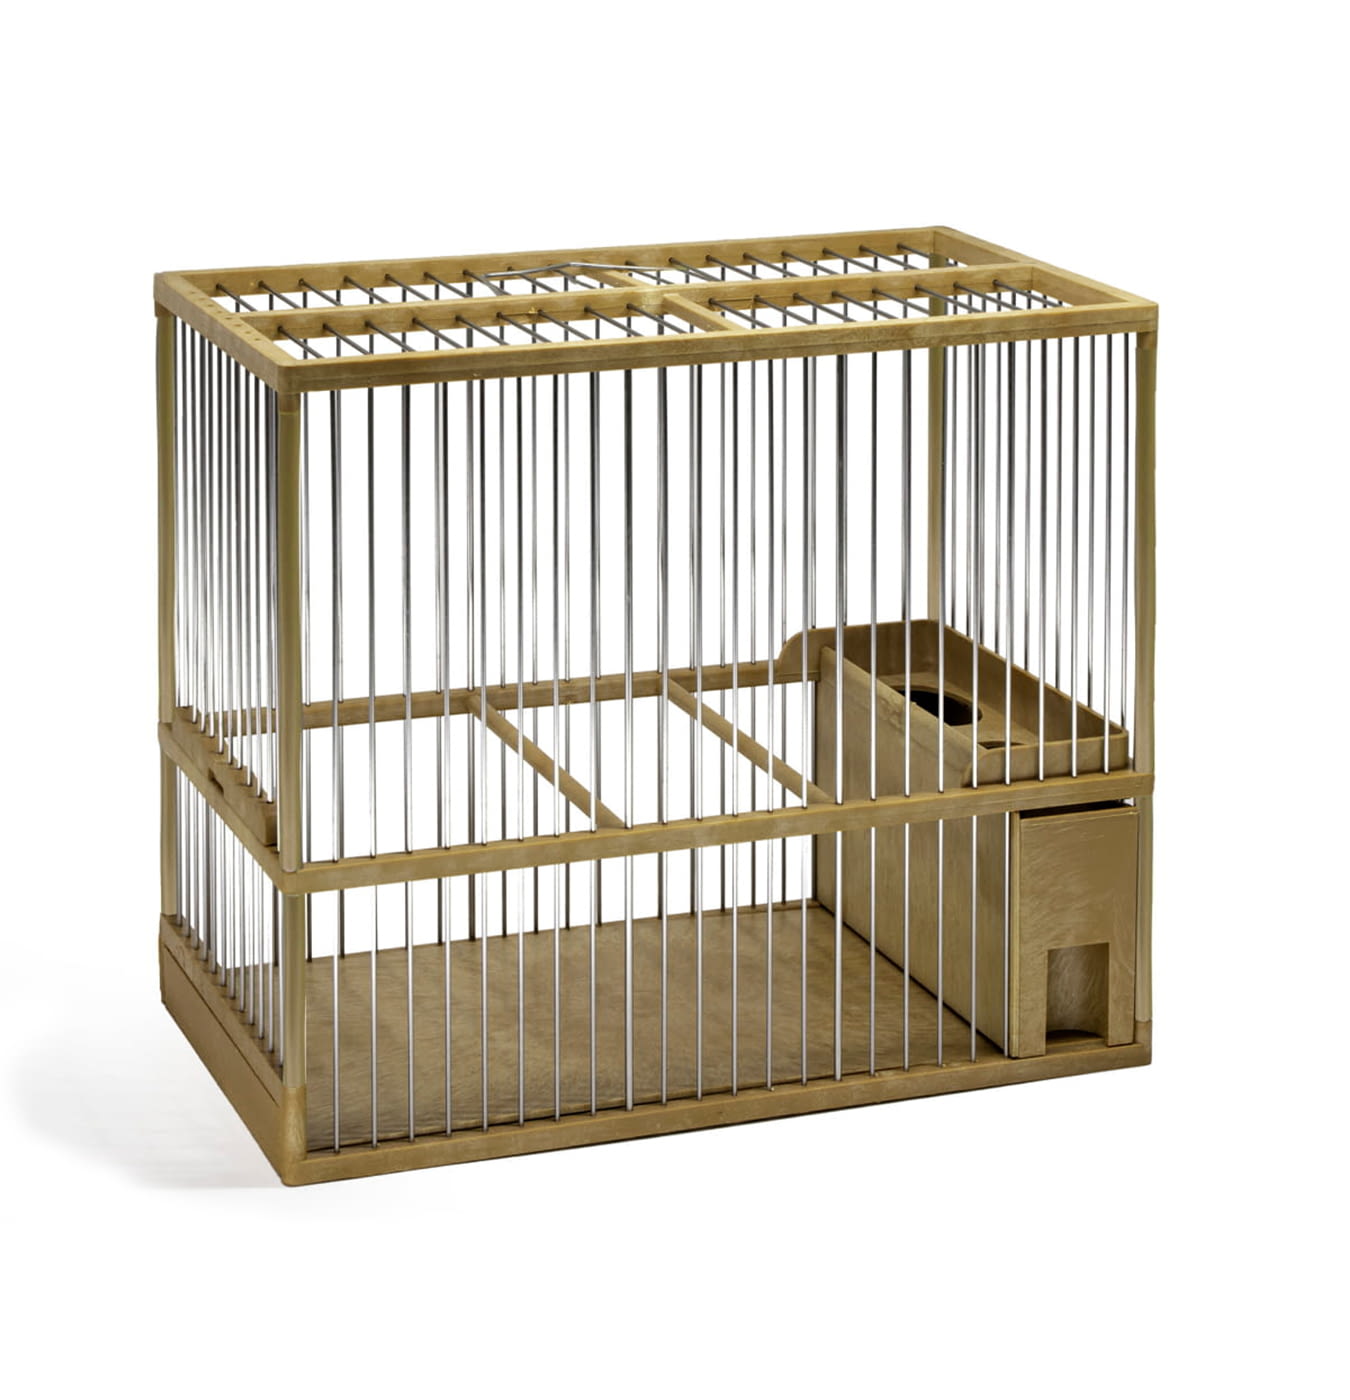 REF - 1004 LARGE COMPETITION CAGE GALVANIZED IRON BEIGE COLOUR